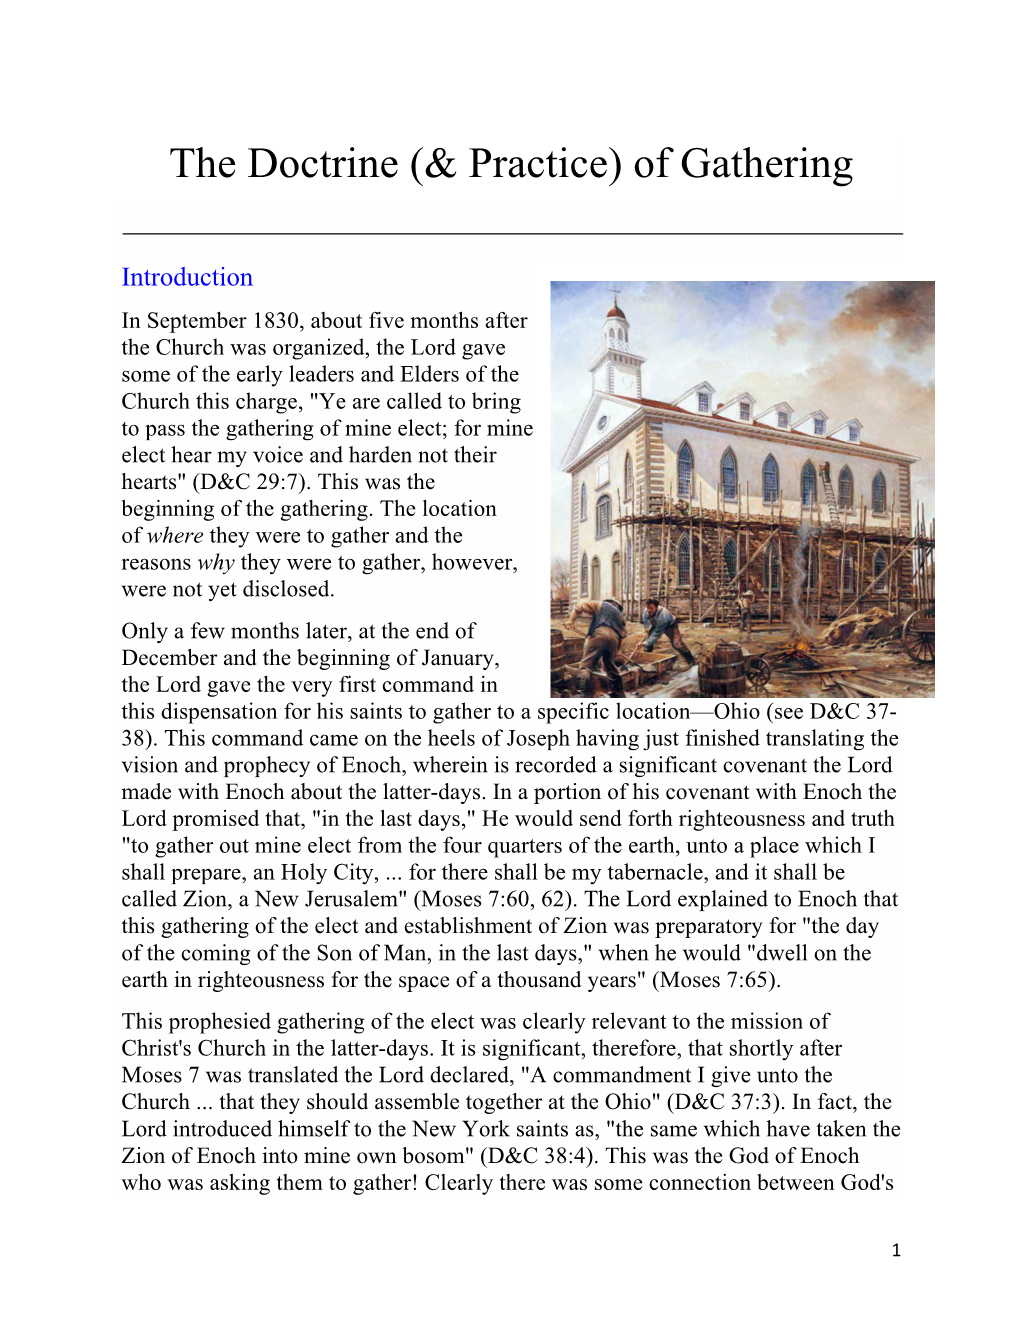 8-The Doctrine and Practice of Gathering